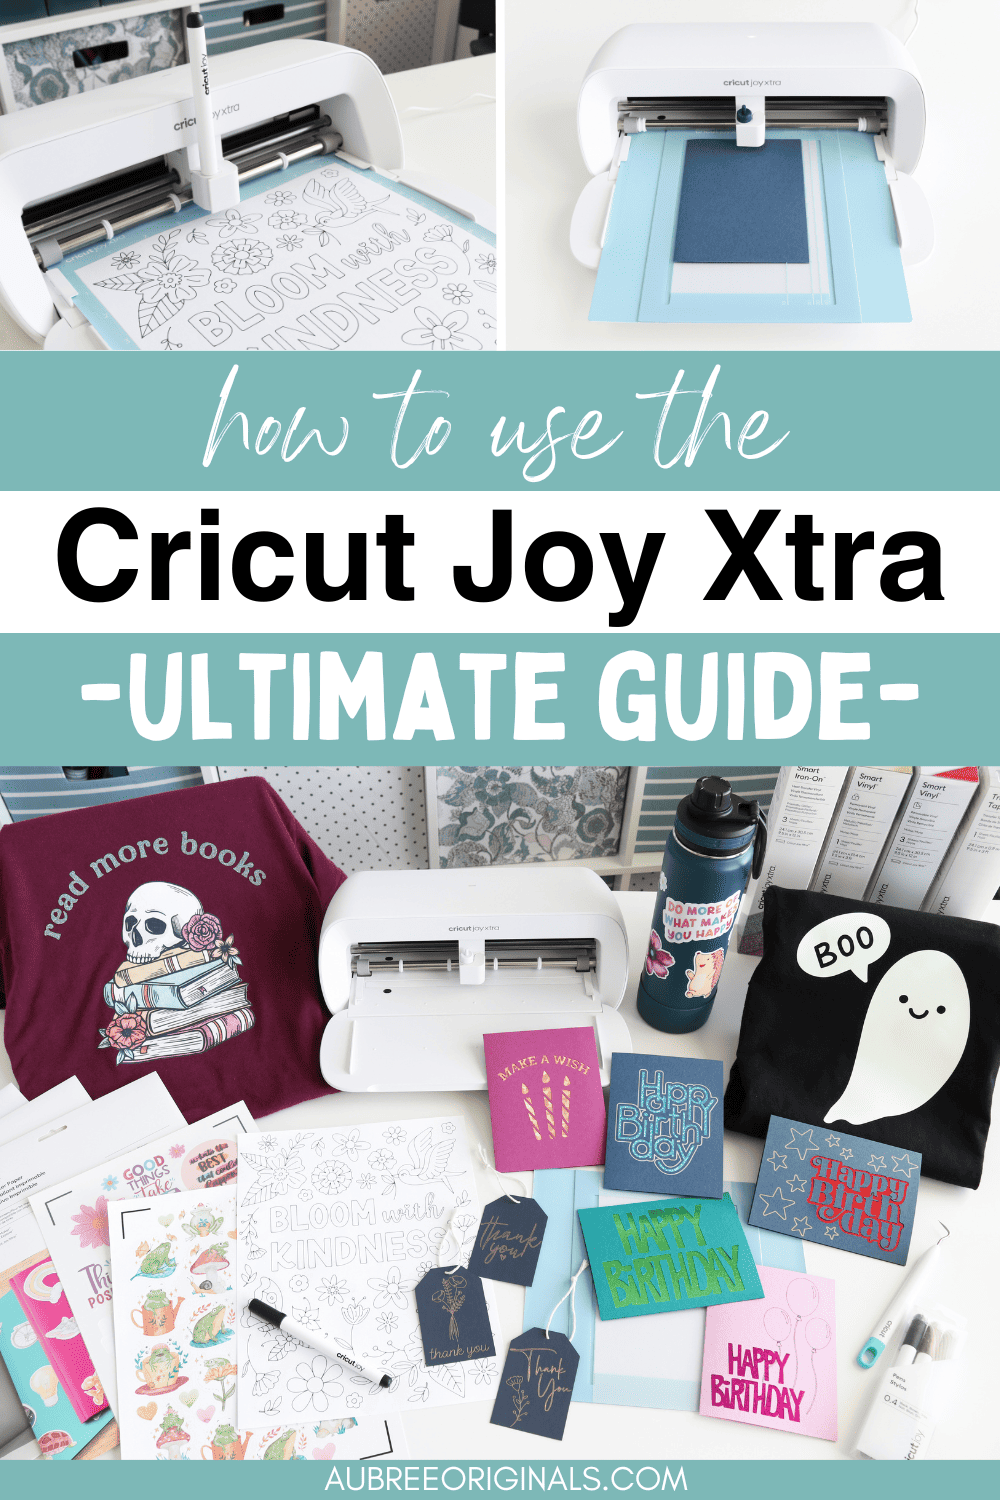 pinterest pin with inspiration for projects you can make with the Cricut Joy xtra: t-shirts, stickers, coloring pages, and cutaway cards